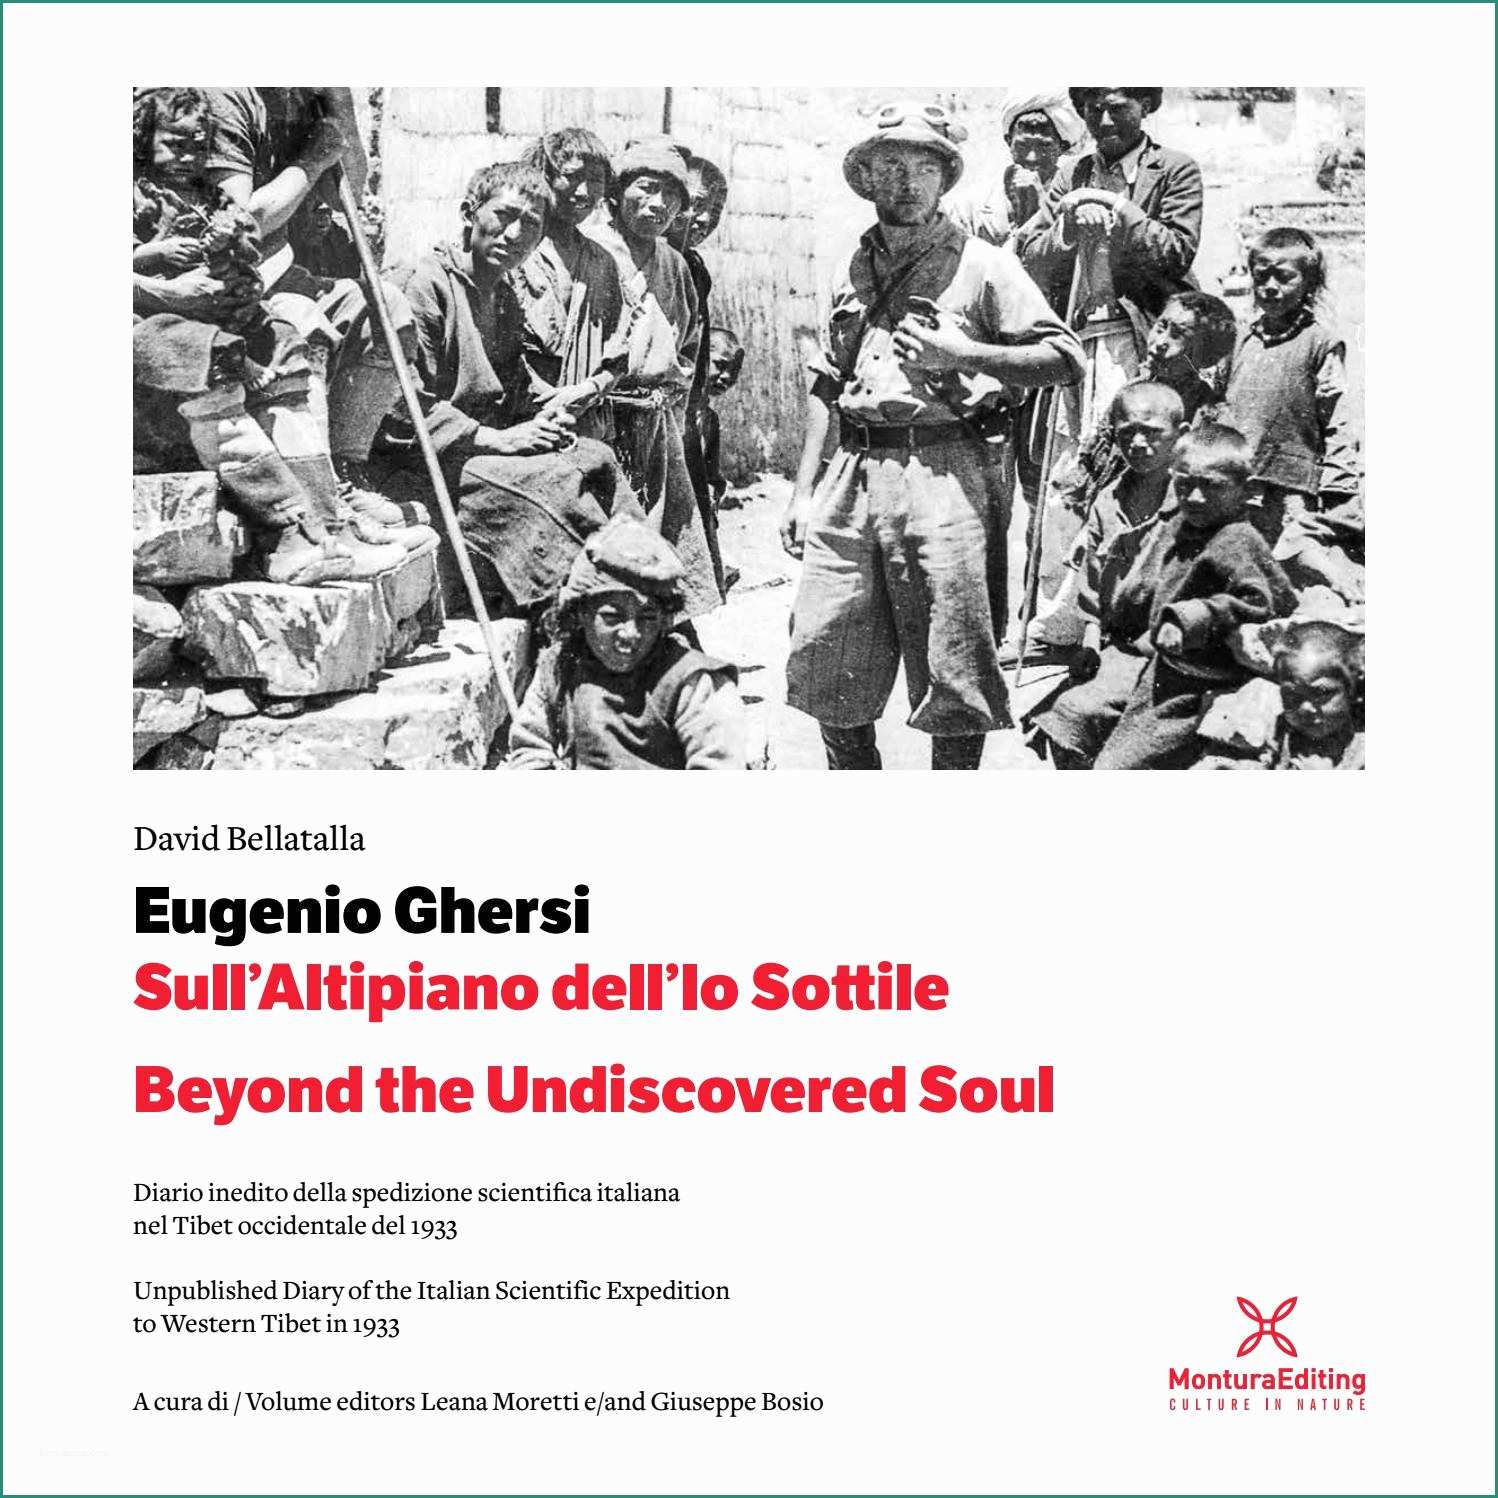 Spedire Pacchi Low Cost E Eugenio Ghersi Beyond the Undiscovered soul by Tasci Montura issuu